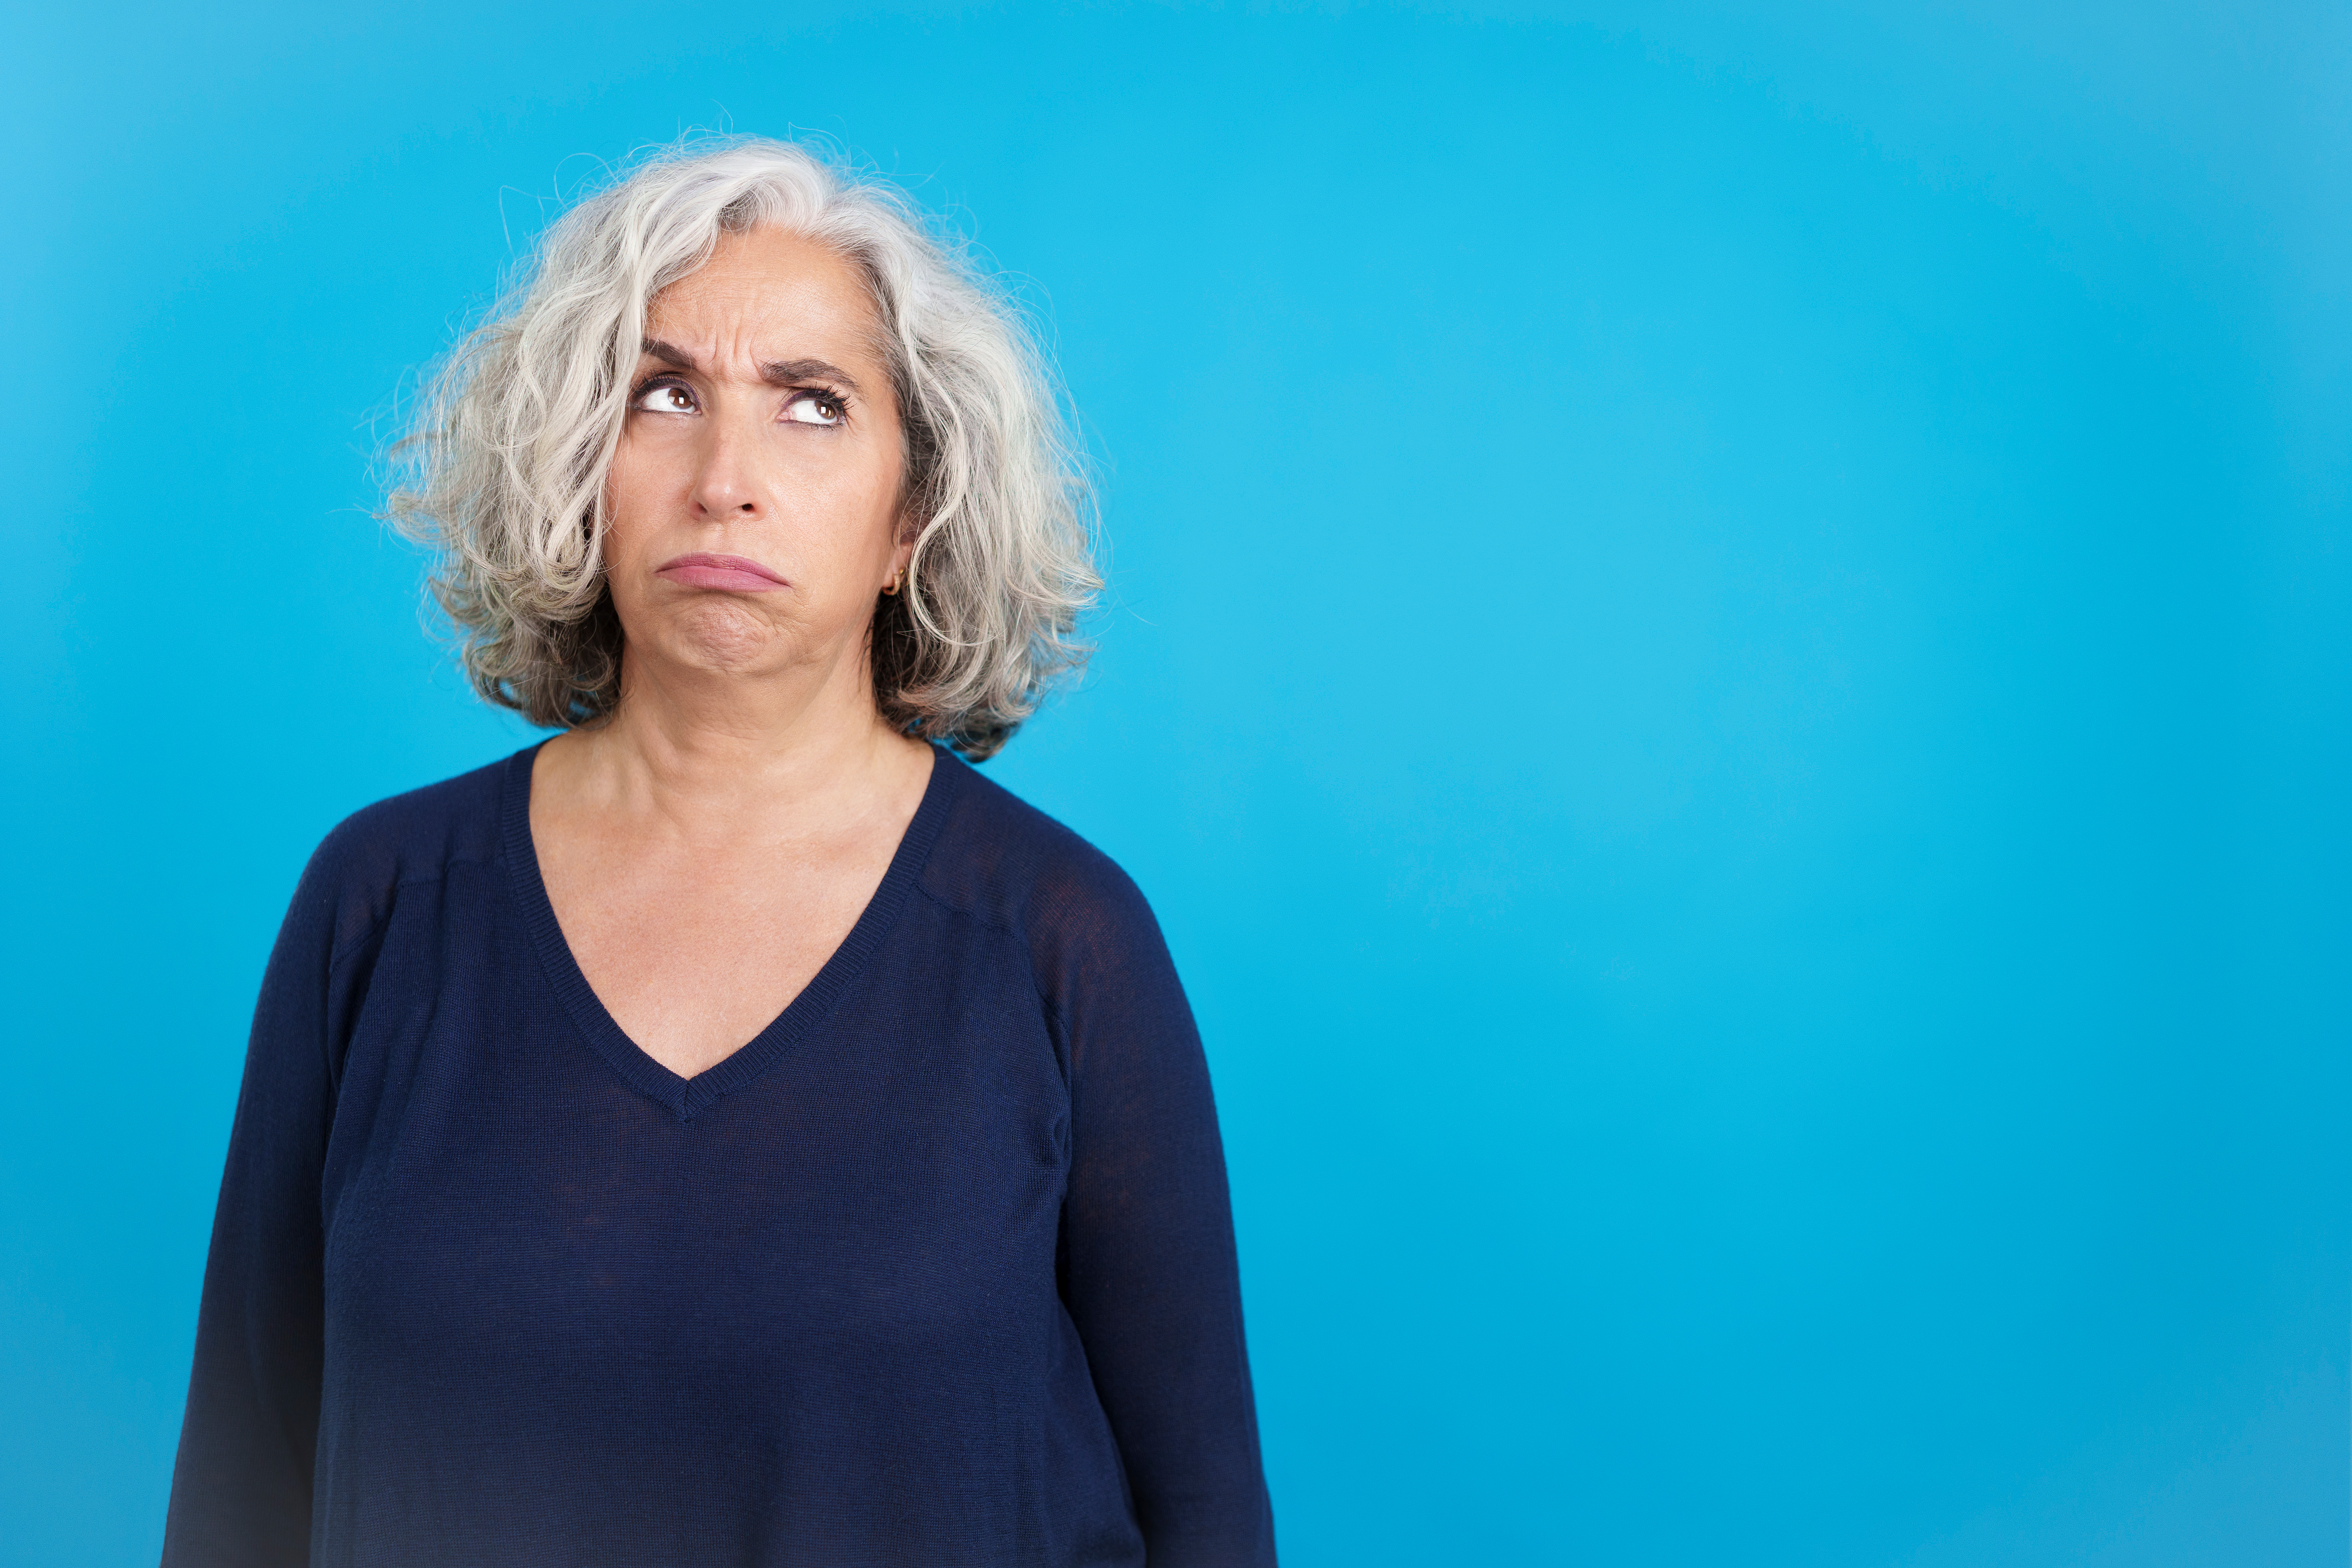 Mature woman looking up with an expression of discontent | Source: Getty Images